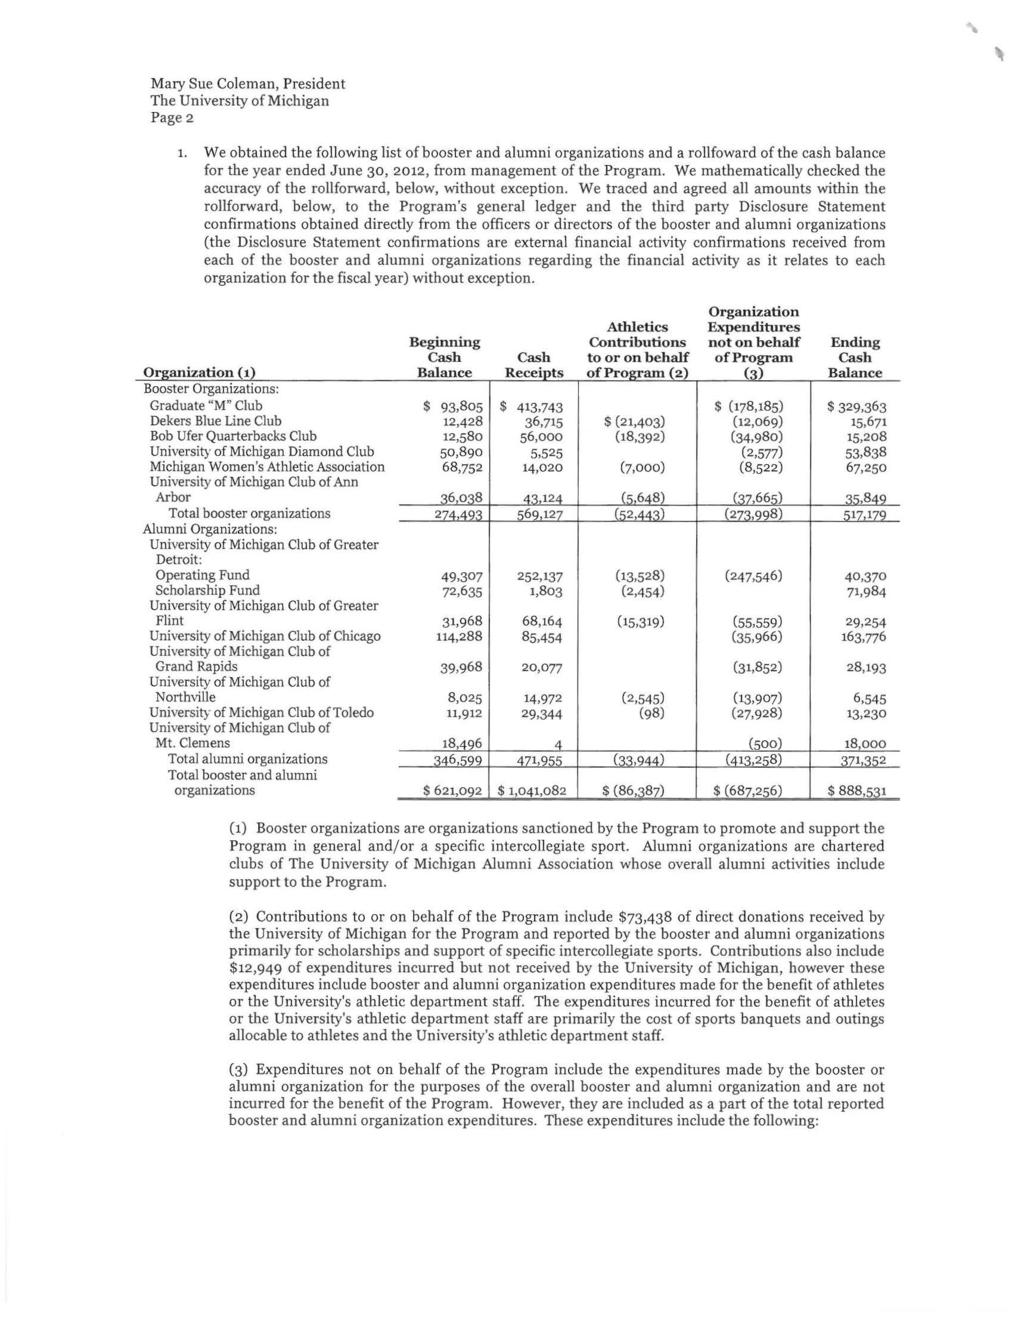 Page 2 1. We obtained the following list of booster and alumni organizations and a rollfoward of the cash balance for the year ended June 30, 2012, from management of the Program.